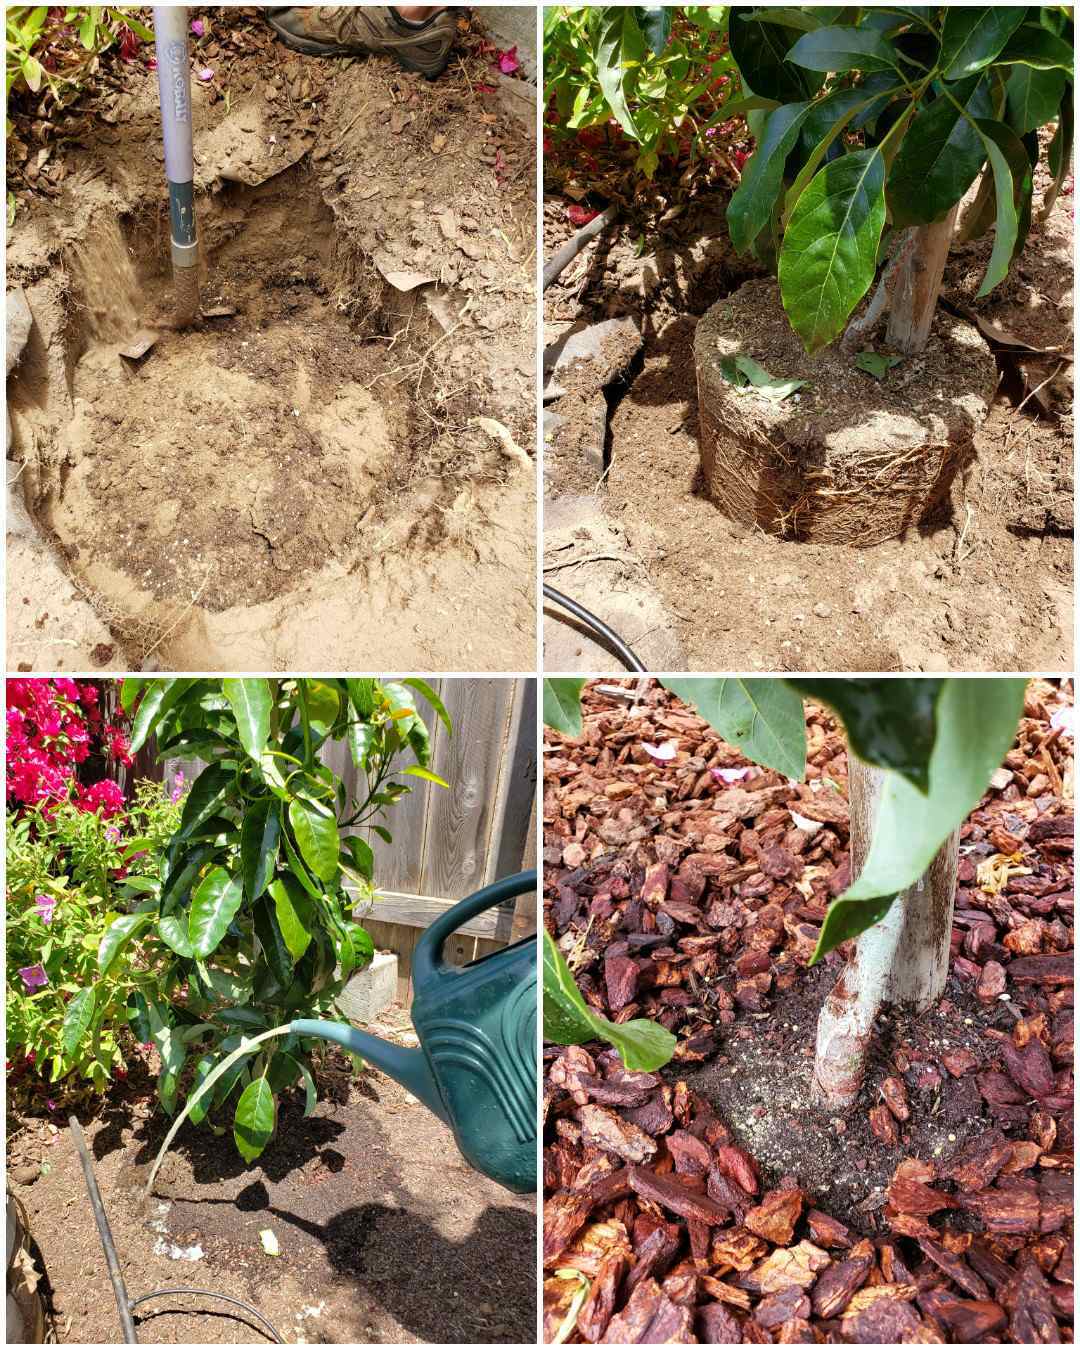 A four way image collage on planting an avocado tree. The first image shows a hole dug in the ground, the second image shows the tree and its rootball sitting inside the hole. The third image shows the tree once it has been planted and covered with dirt. A watering can is being used to water in an aloe vera soil drench. The fourth image shows the tree once it has been mulched with bark, showing not to keep bark mulched against the tree stalk itself. In a year or two this young tree should be growing avocados. 